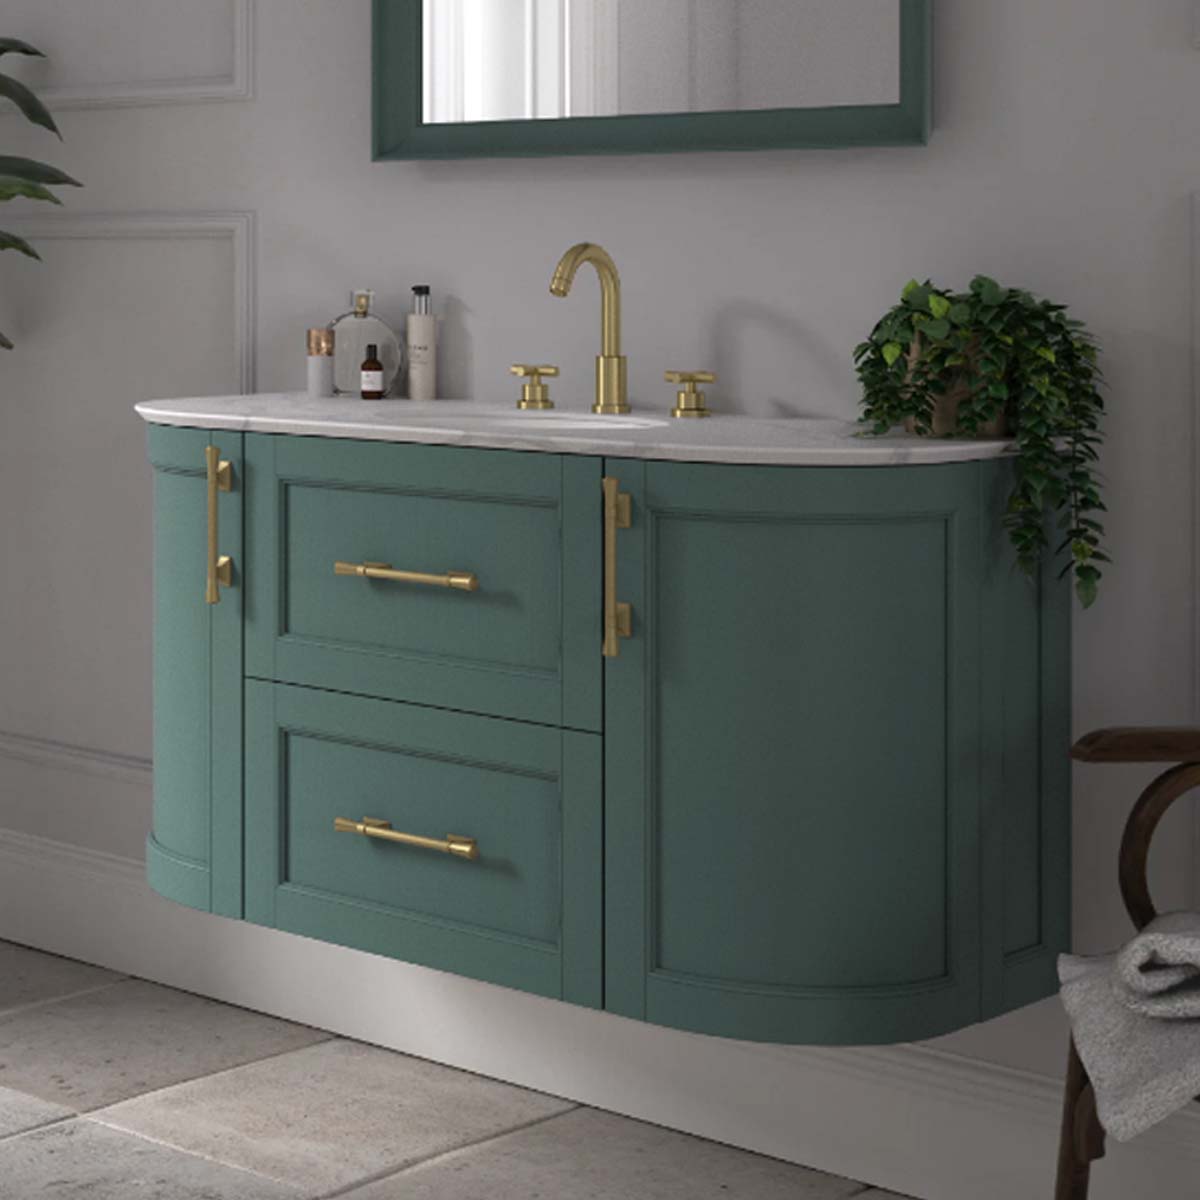 Utopia Roseberry Curved Wall Mounted Vanity Unit With Imperial White Worktop And Solid Surface Undermount Basin Emerald Green